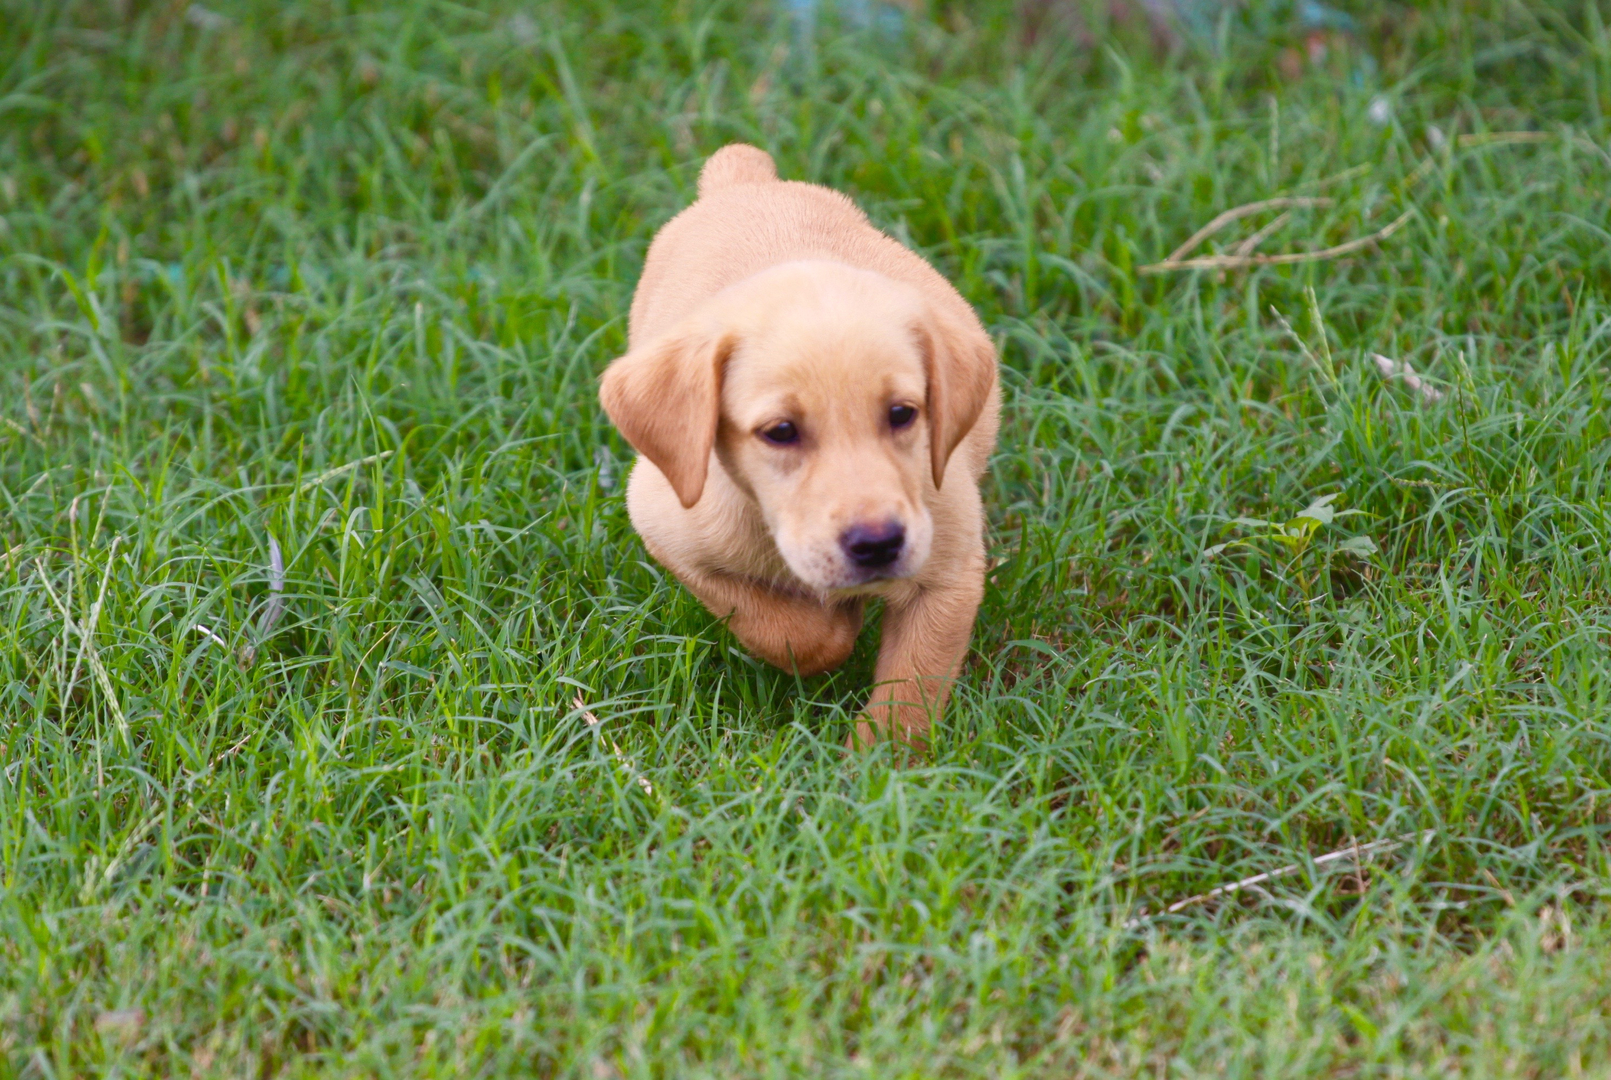 Texas Labrador Puppies For Sale Yellow Black Chocolate Puppy